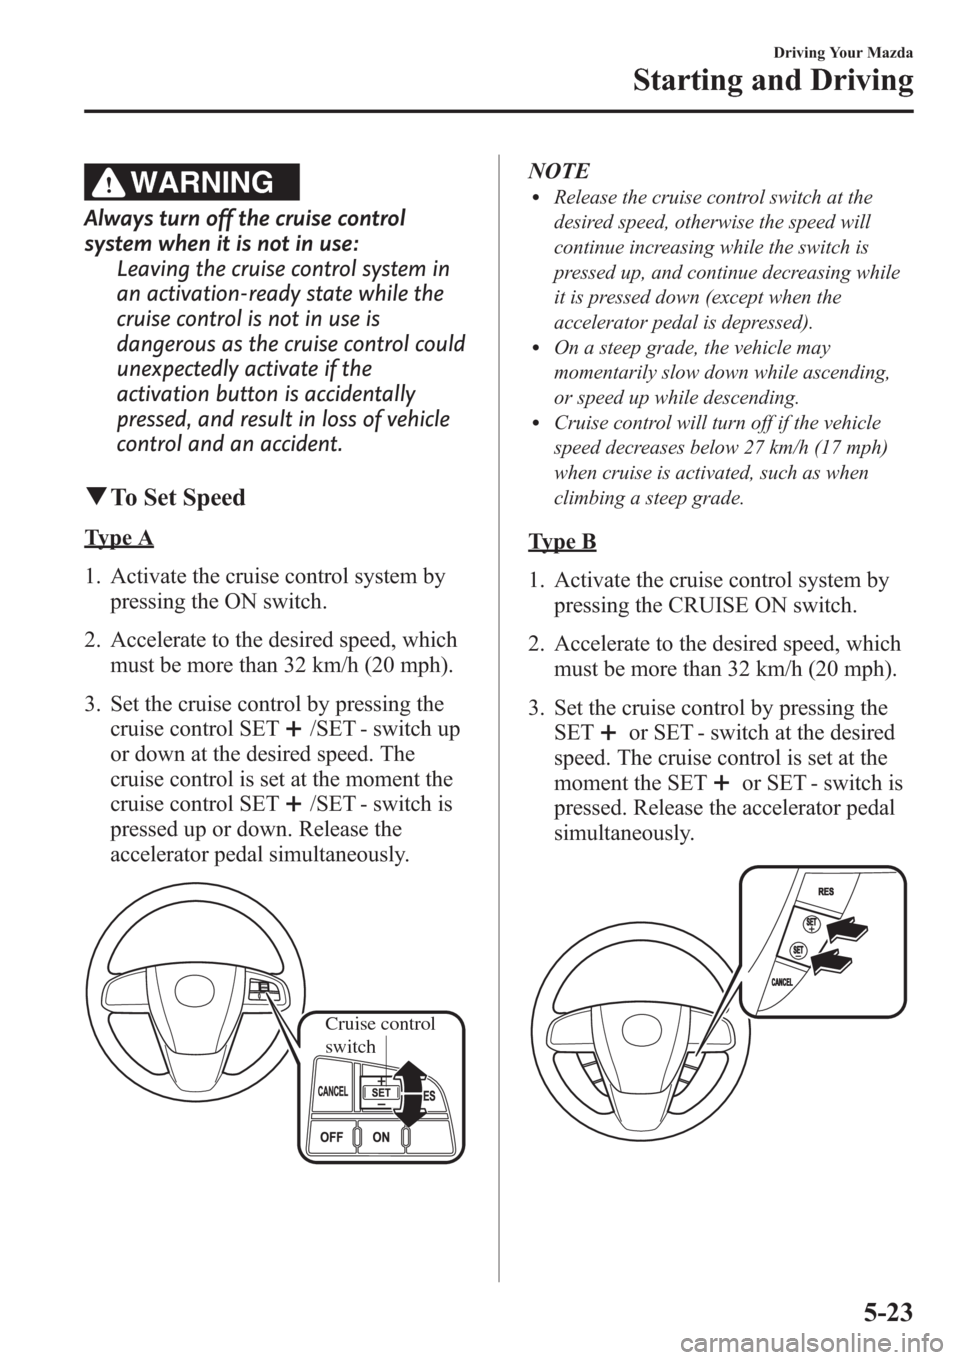 MAZDA MODEL 3 HATCHBACK 2013  Owners Manual (in English) WARNING
Always turn off the cruise control
system when it is not in use:
Leaving the cruise control system in
an activation-ready state while the
cruise control is not in use is
dangerous as the cruis